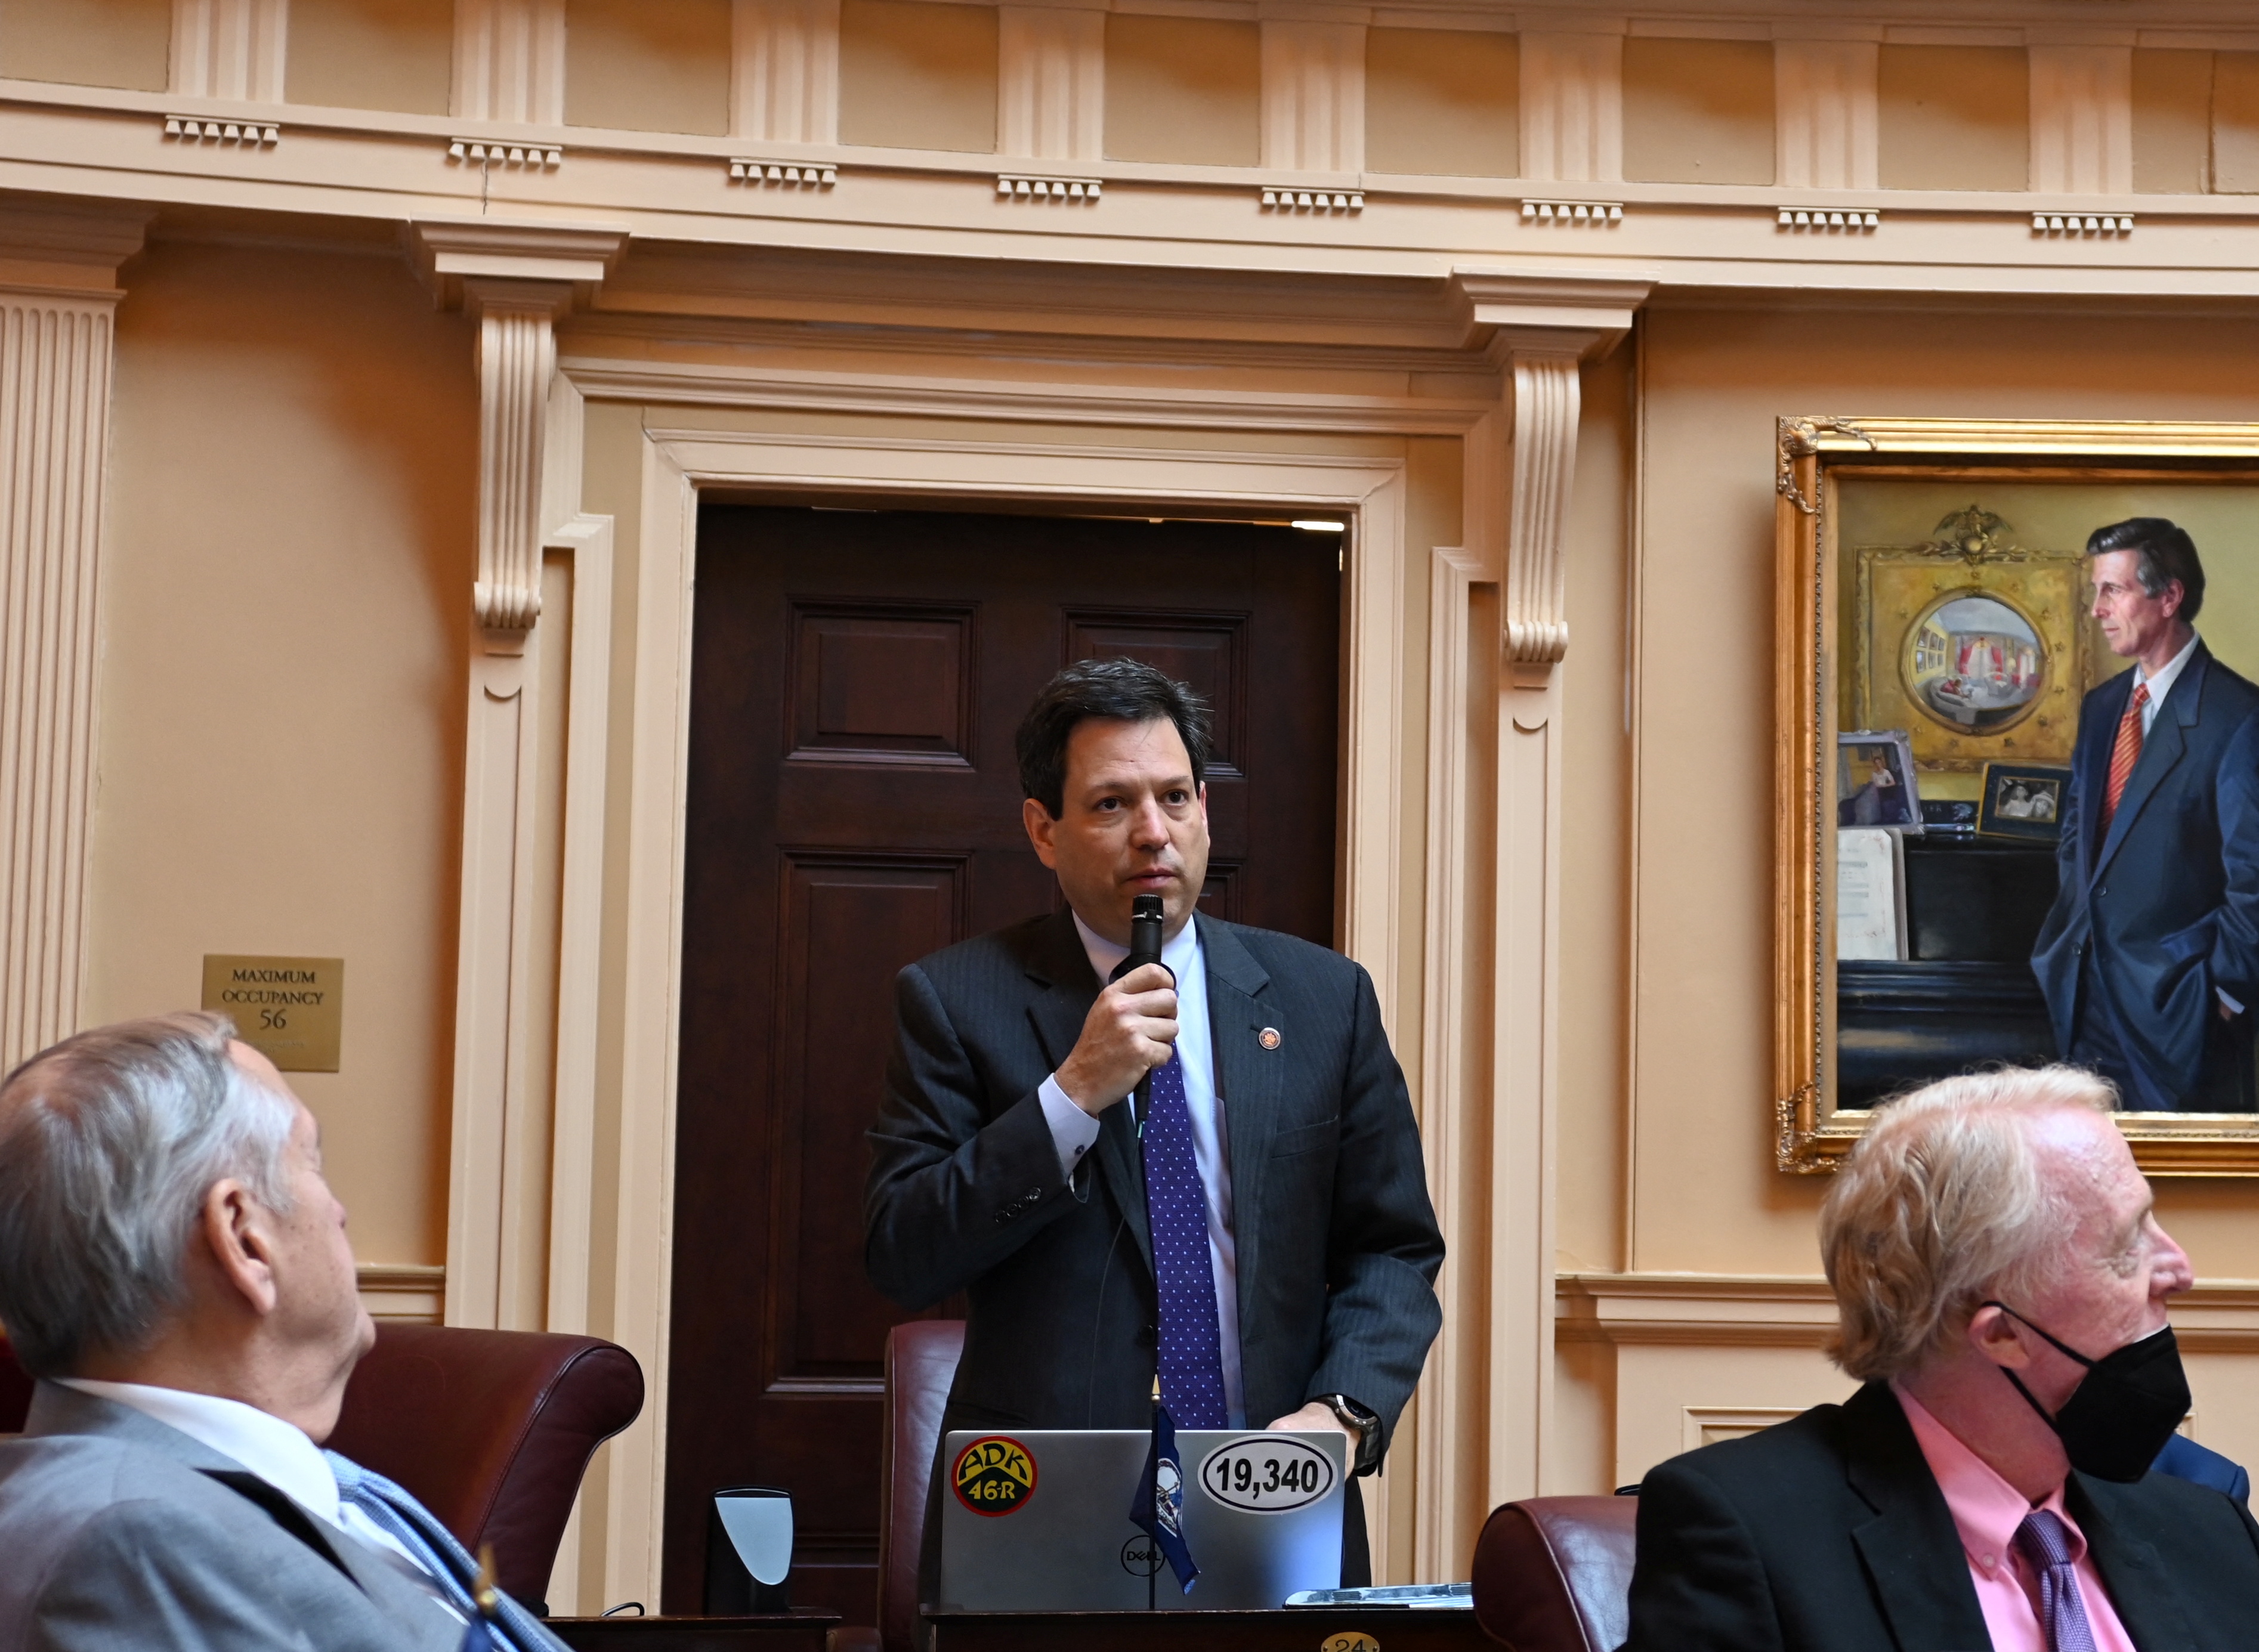 Virginia State Senator Scott Surovell, who sponsored legislation to allow for police use of facial recognition, speaks holding a microphone during a senate session, in Richmond